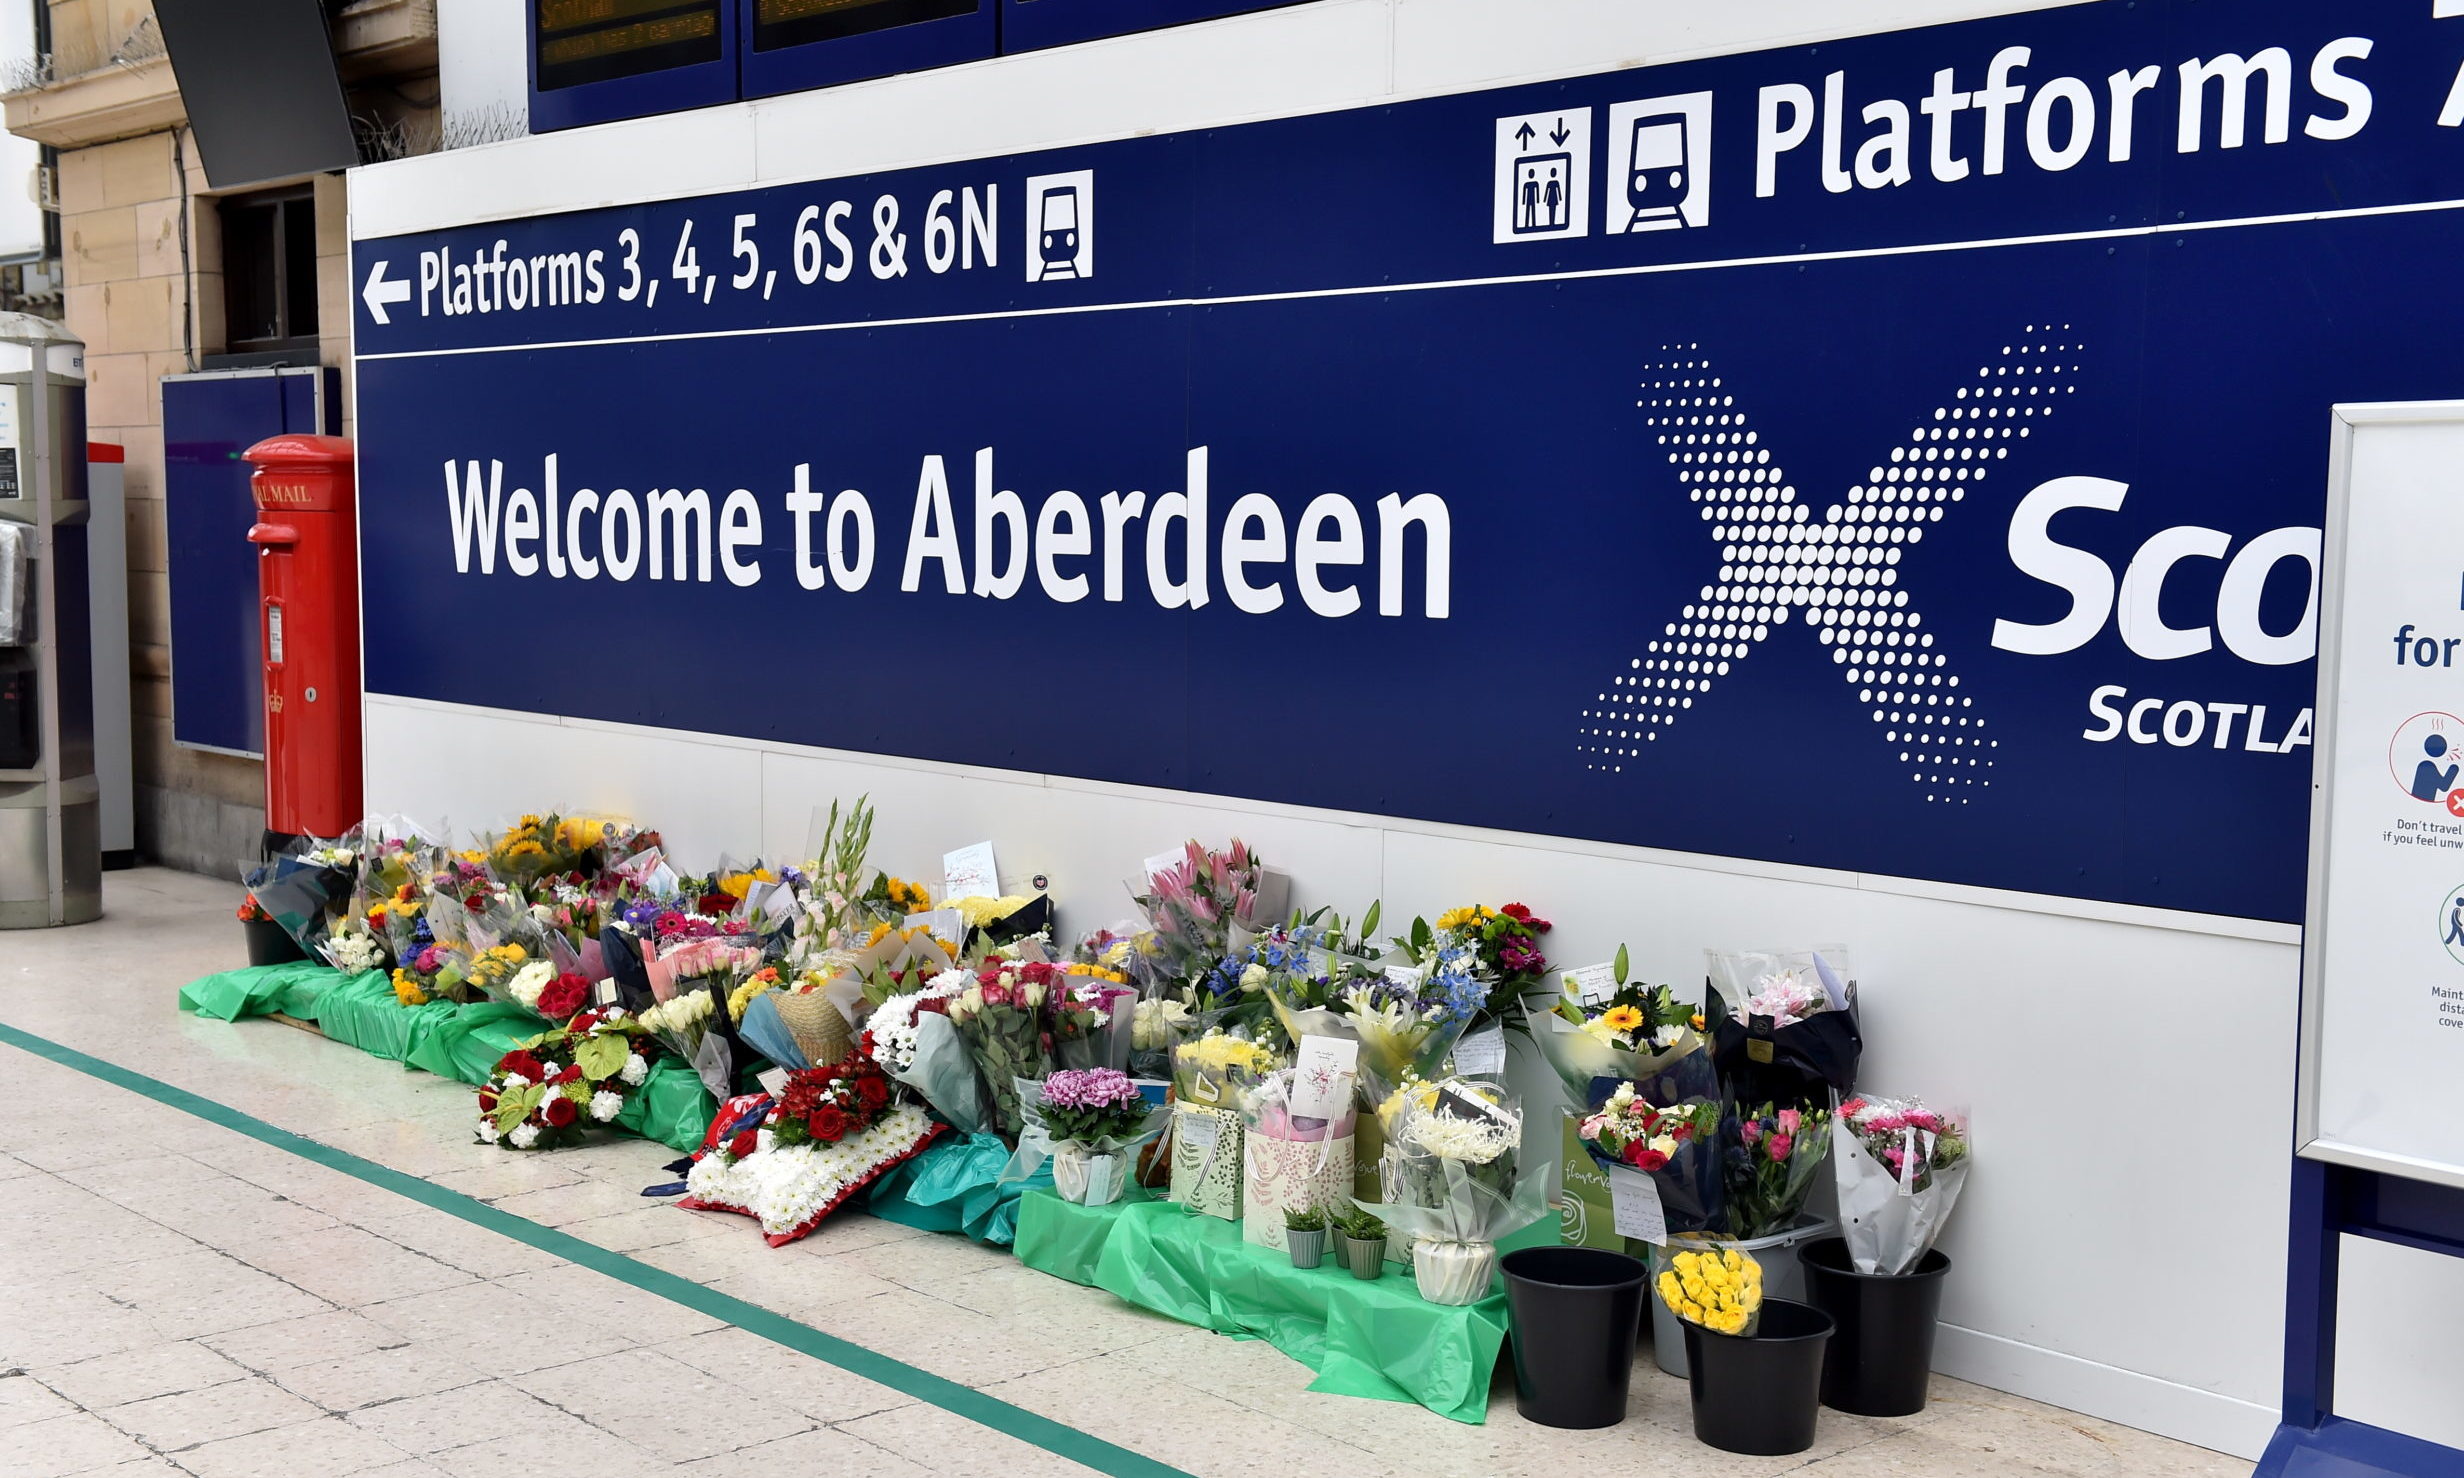 Flowers have been left at Aberdeen train station in memory of the victims. Picture by Scott Baxter